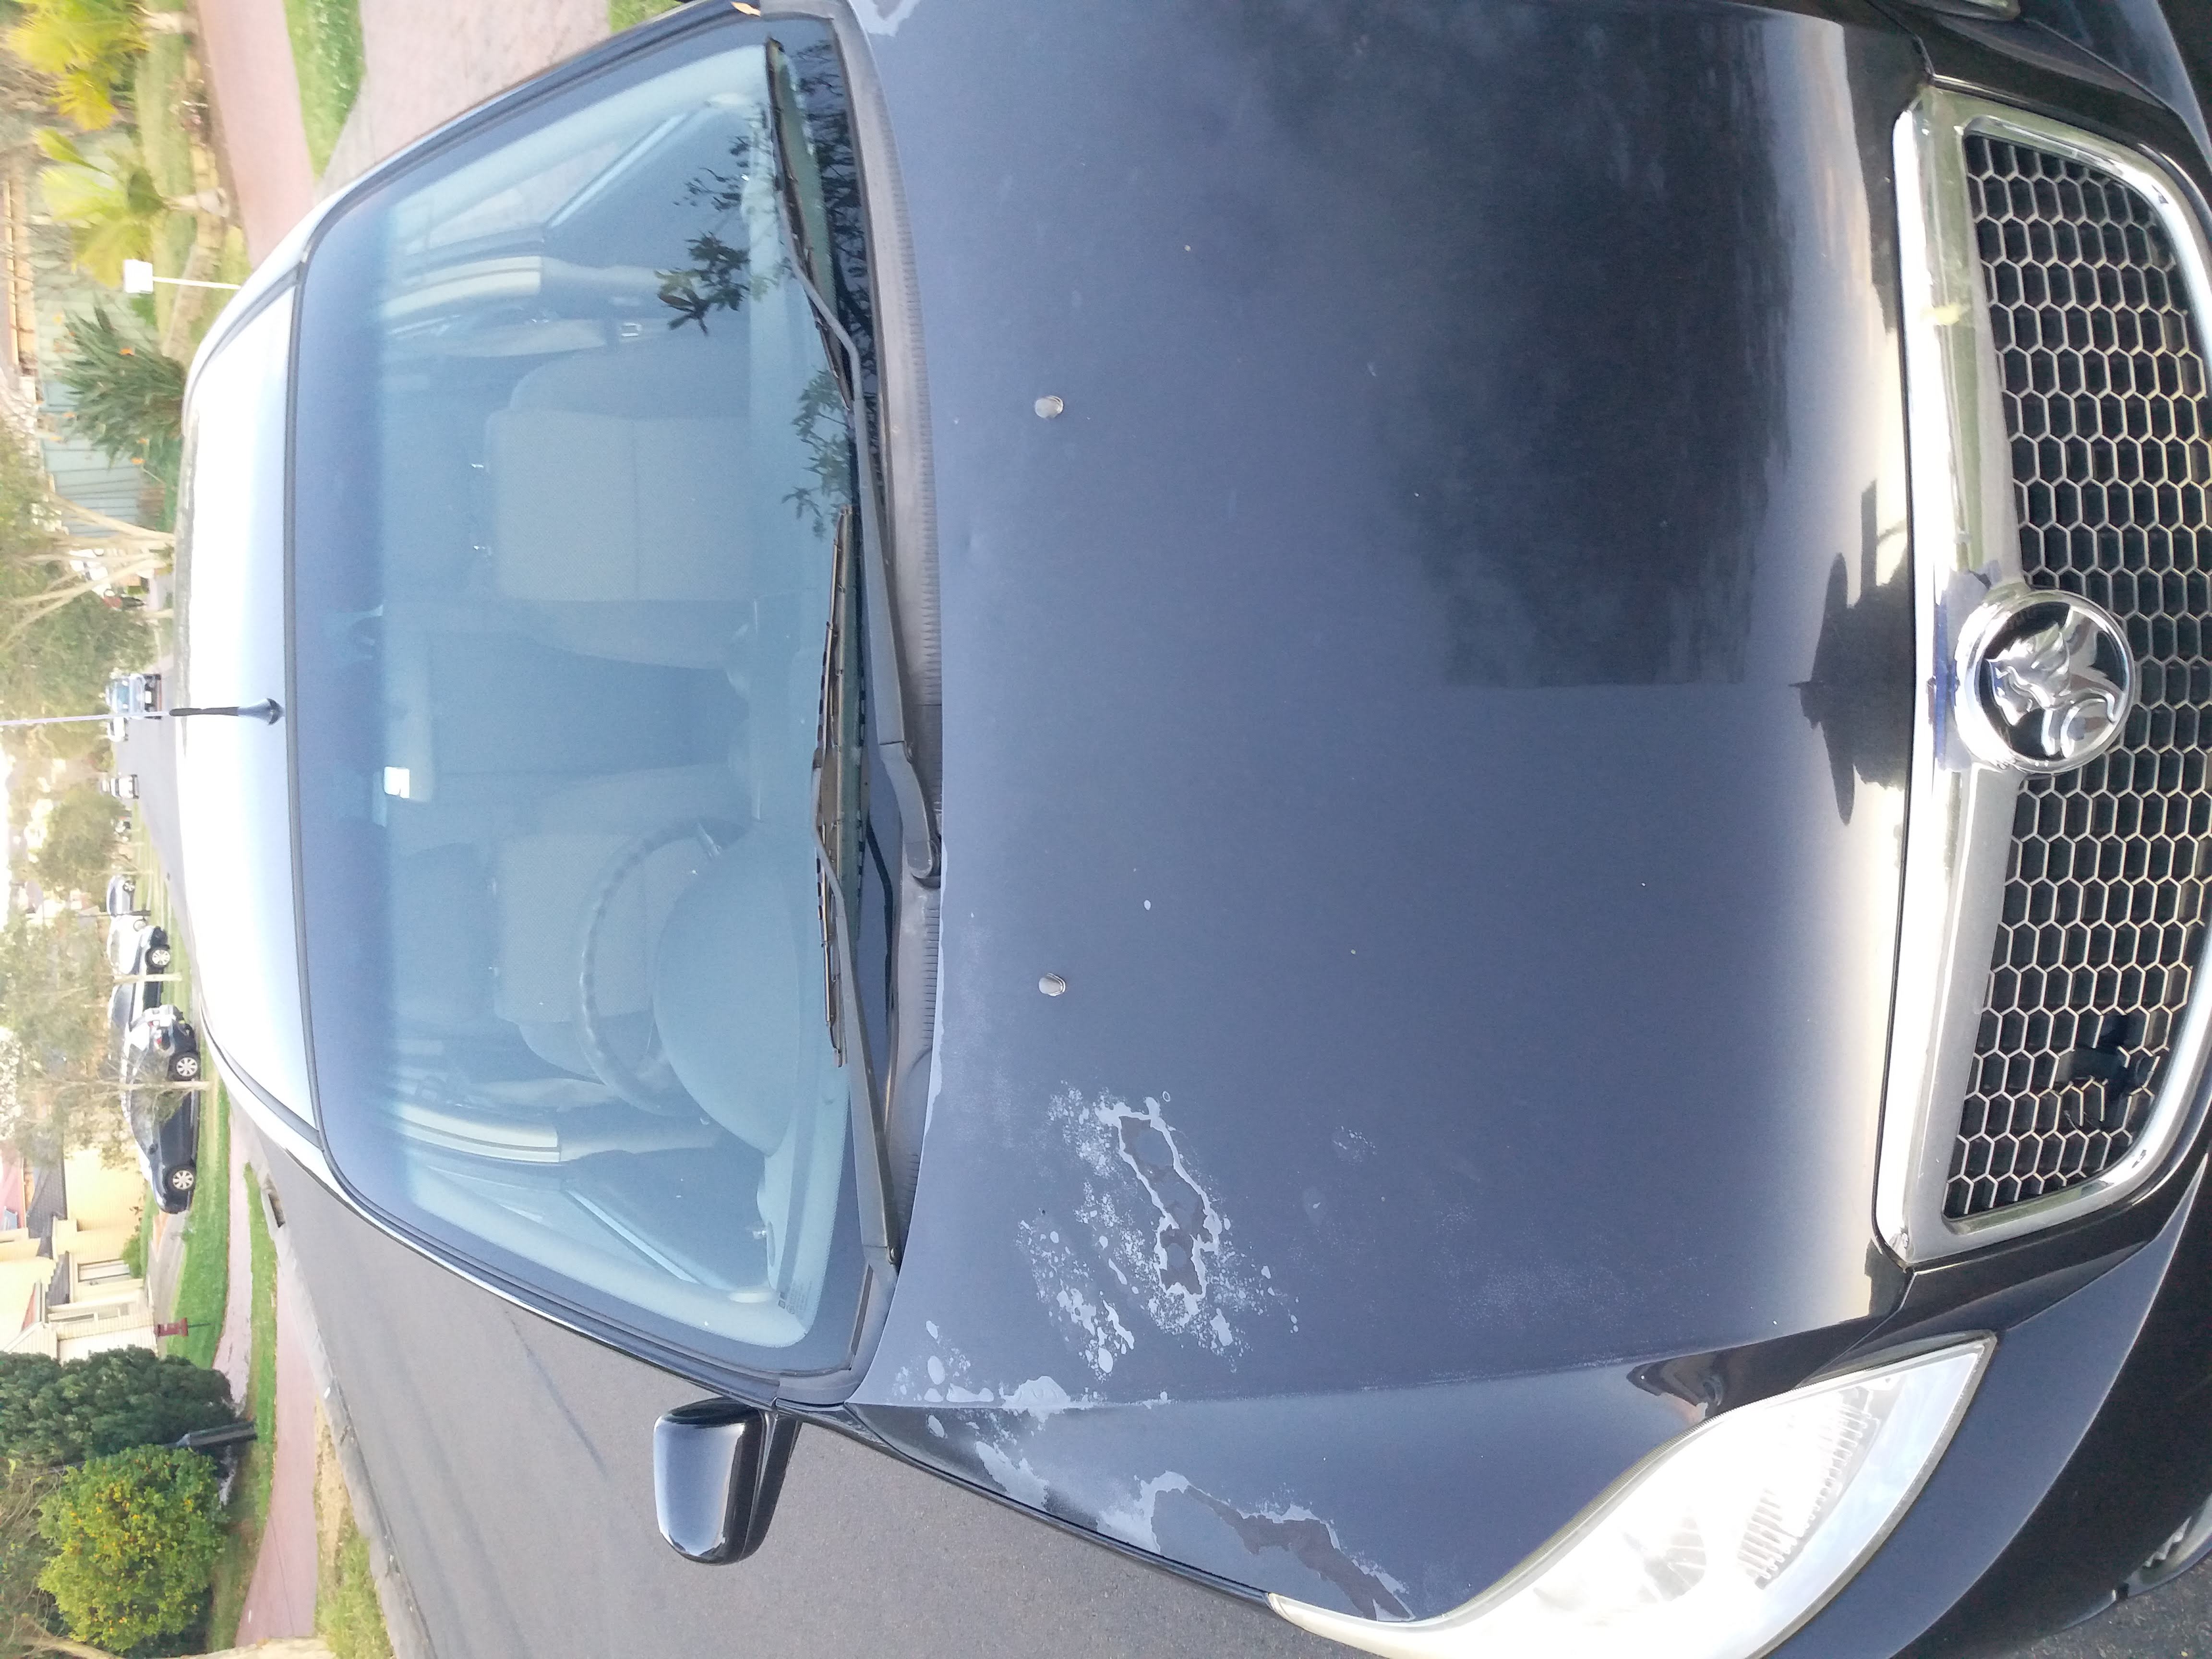 Holden Barina 4 Dr TK Hatch 2010 used car part search needing a bonnet in black for a 4 door hatch TK